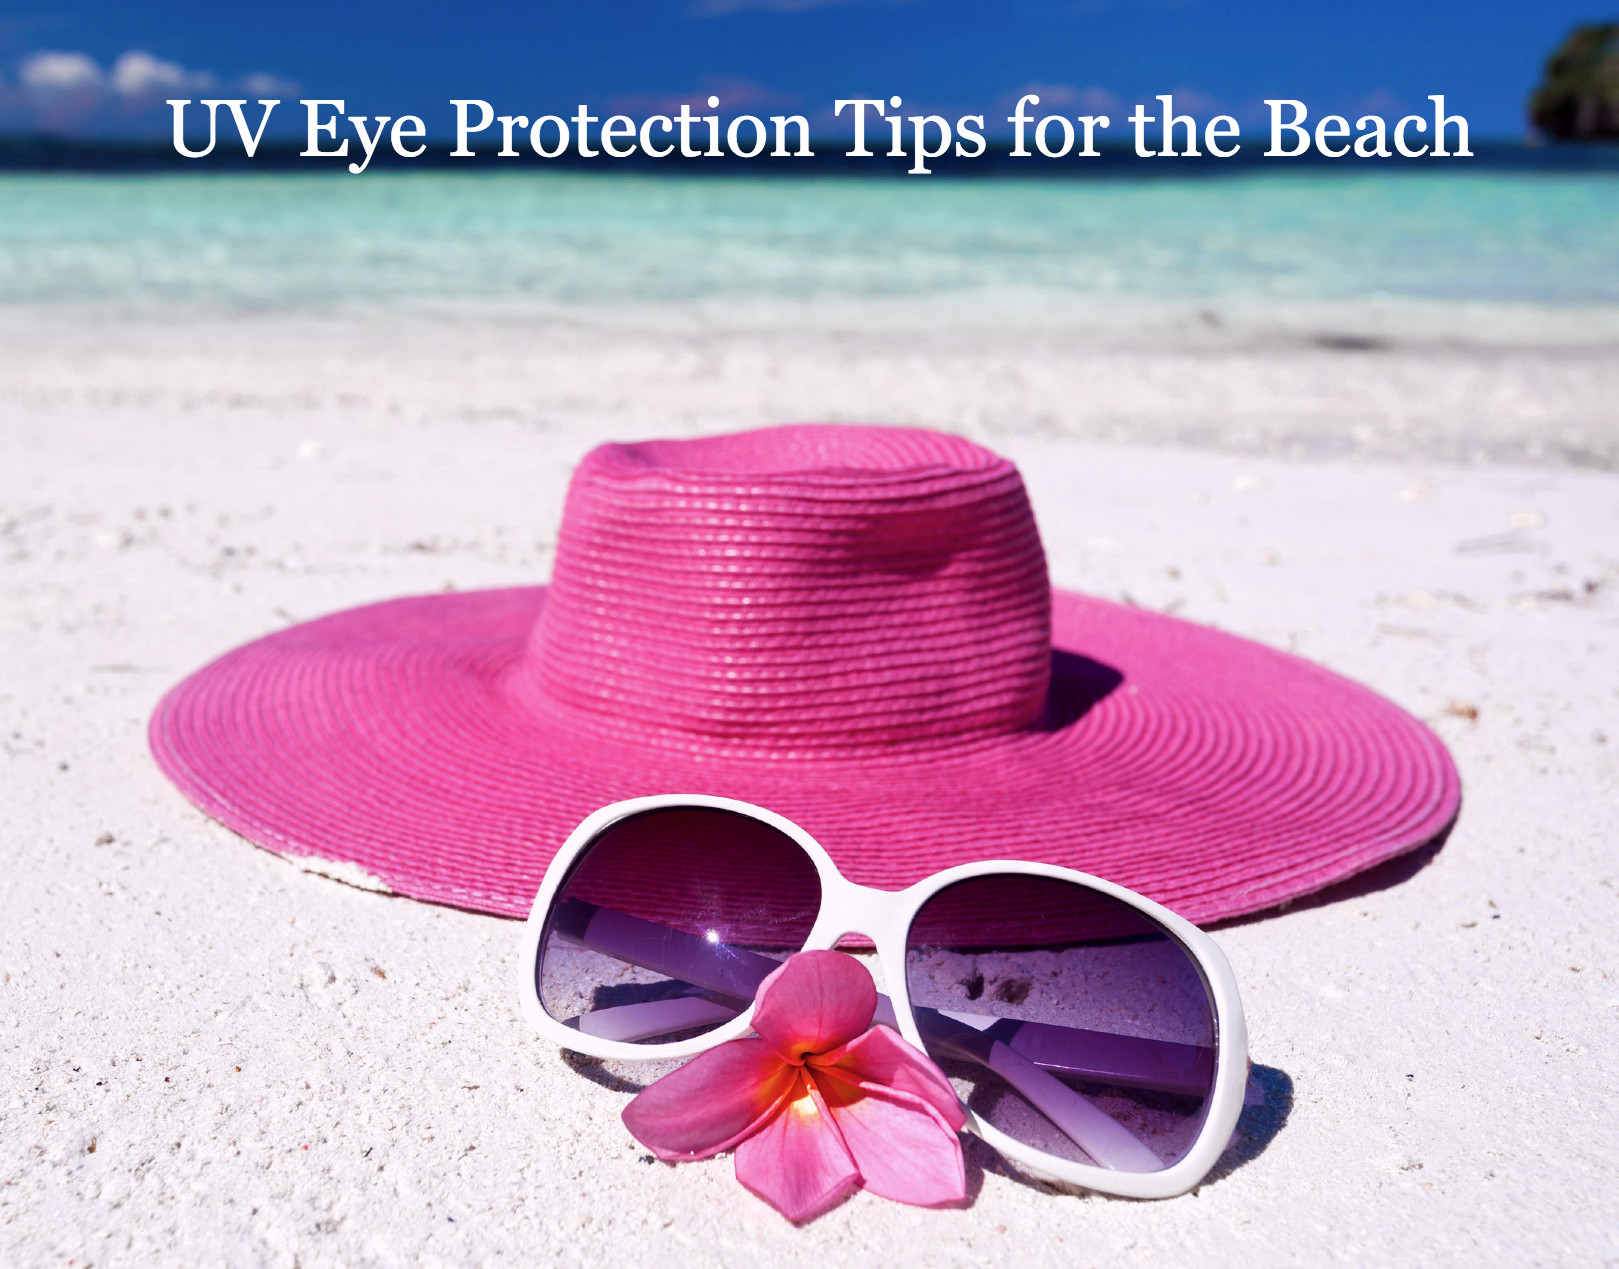 uv eye protection tips pink hat and sunglasses